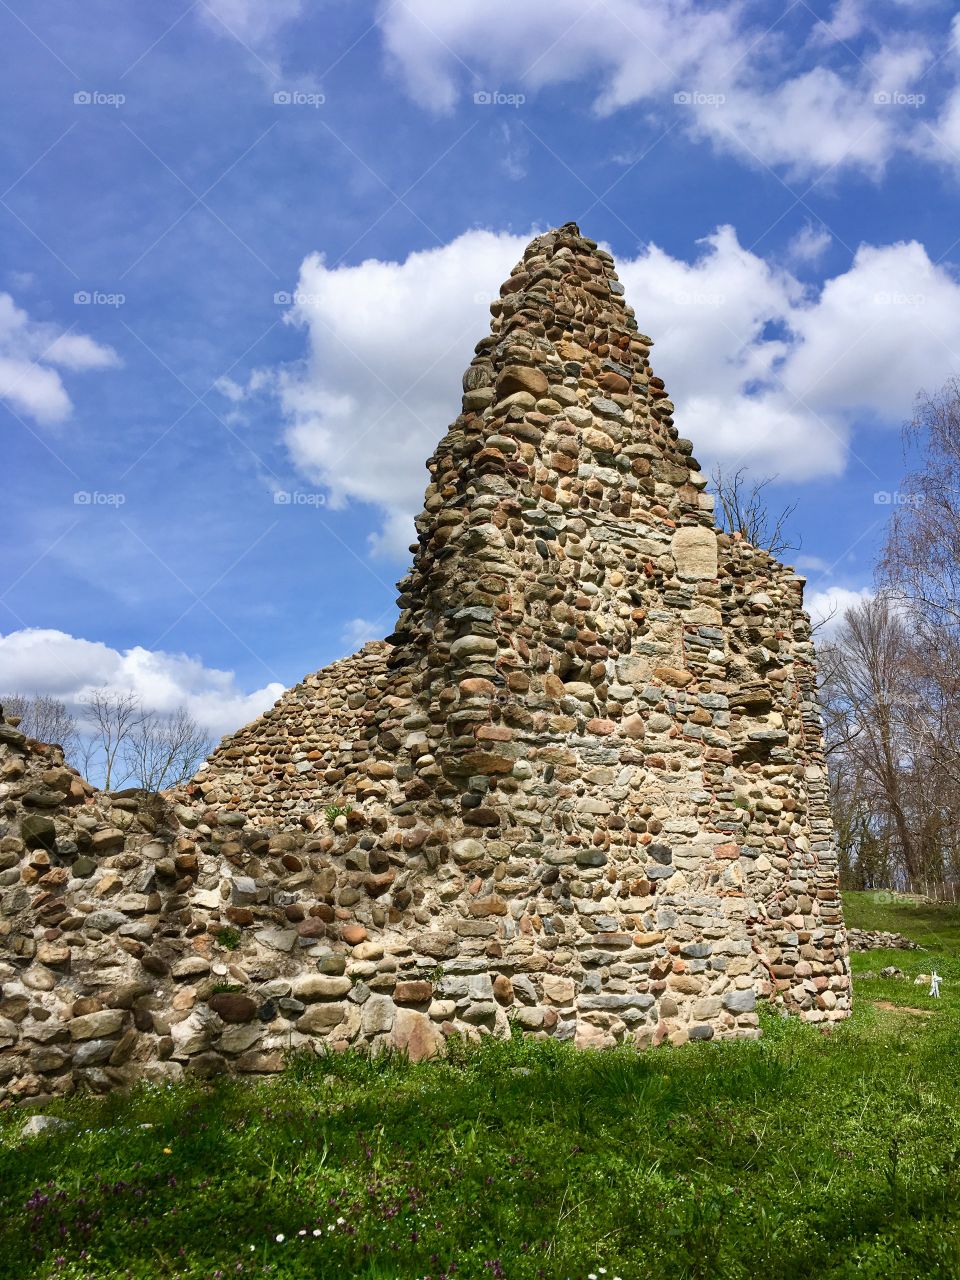 Remains of the ancient church of S. Paolo, eleventh century, archaeological area of Castelseprio, province of Varese